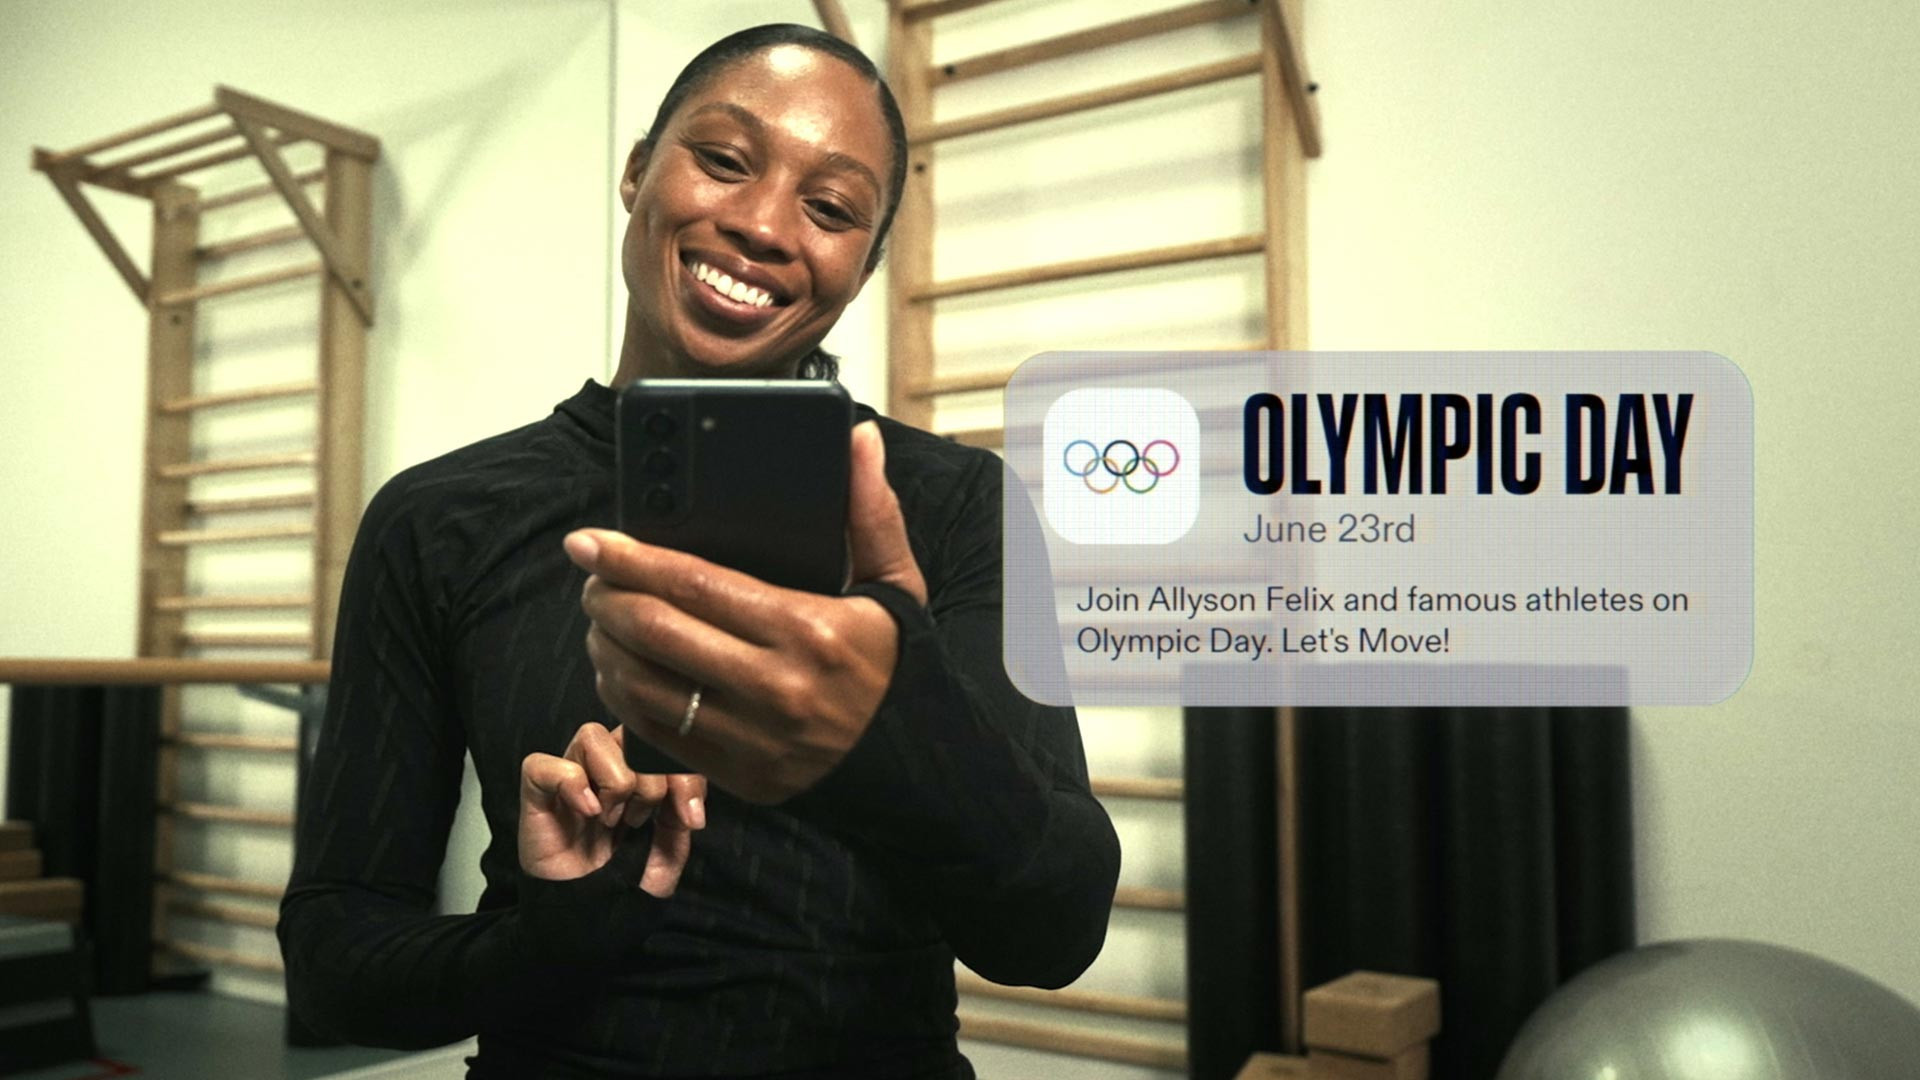 Bach and IOC aiming to inspire with Let's Move campaign on Olympic Day